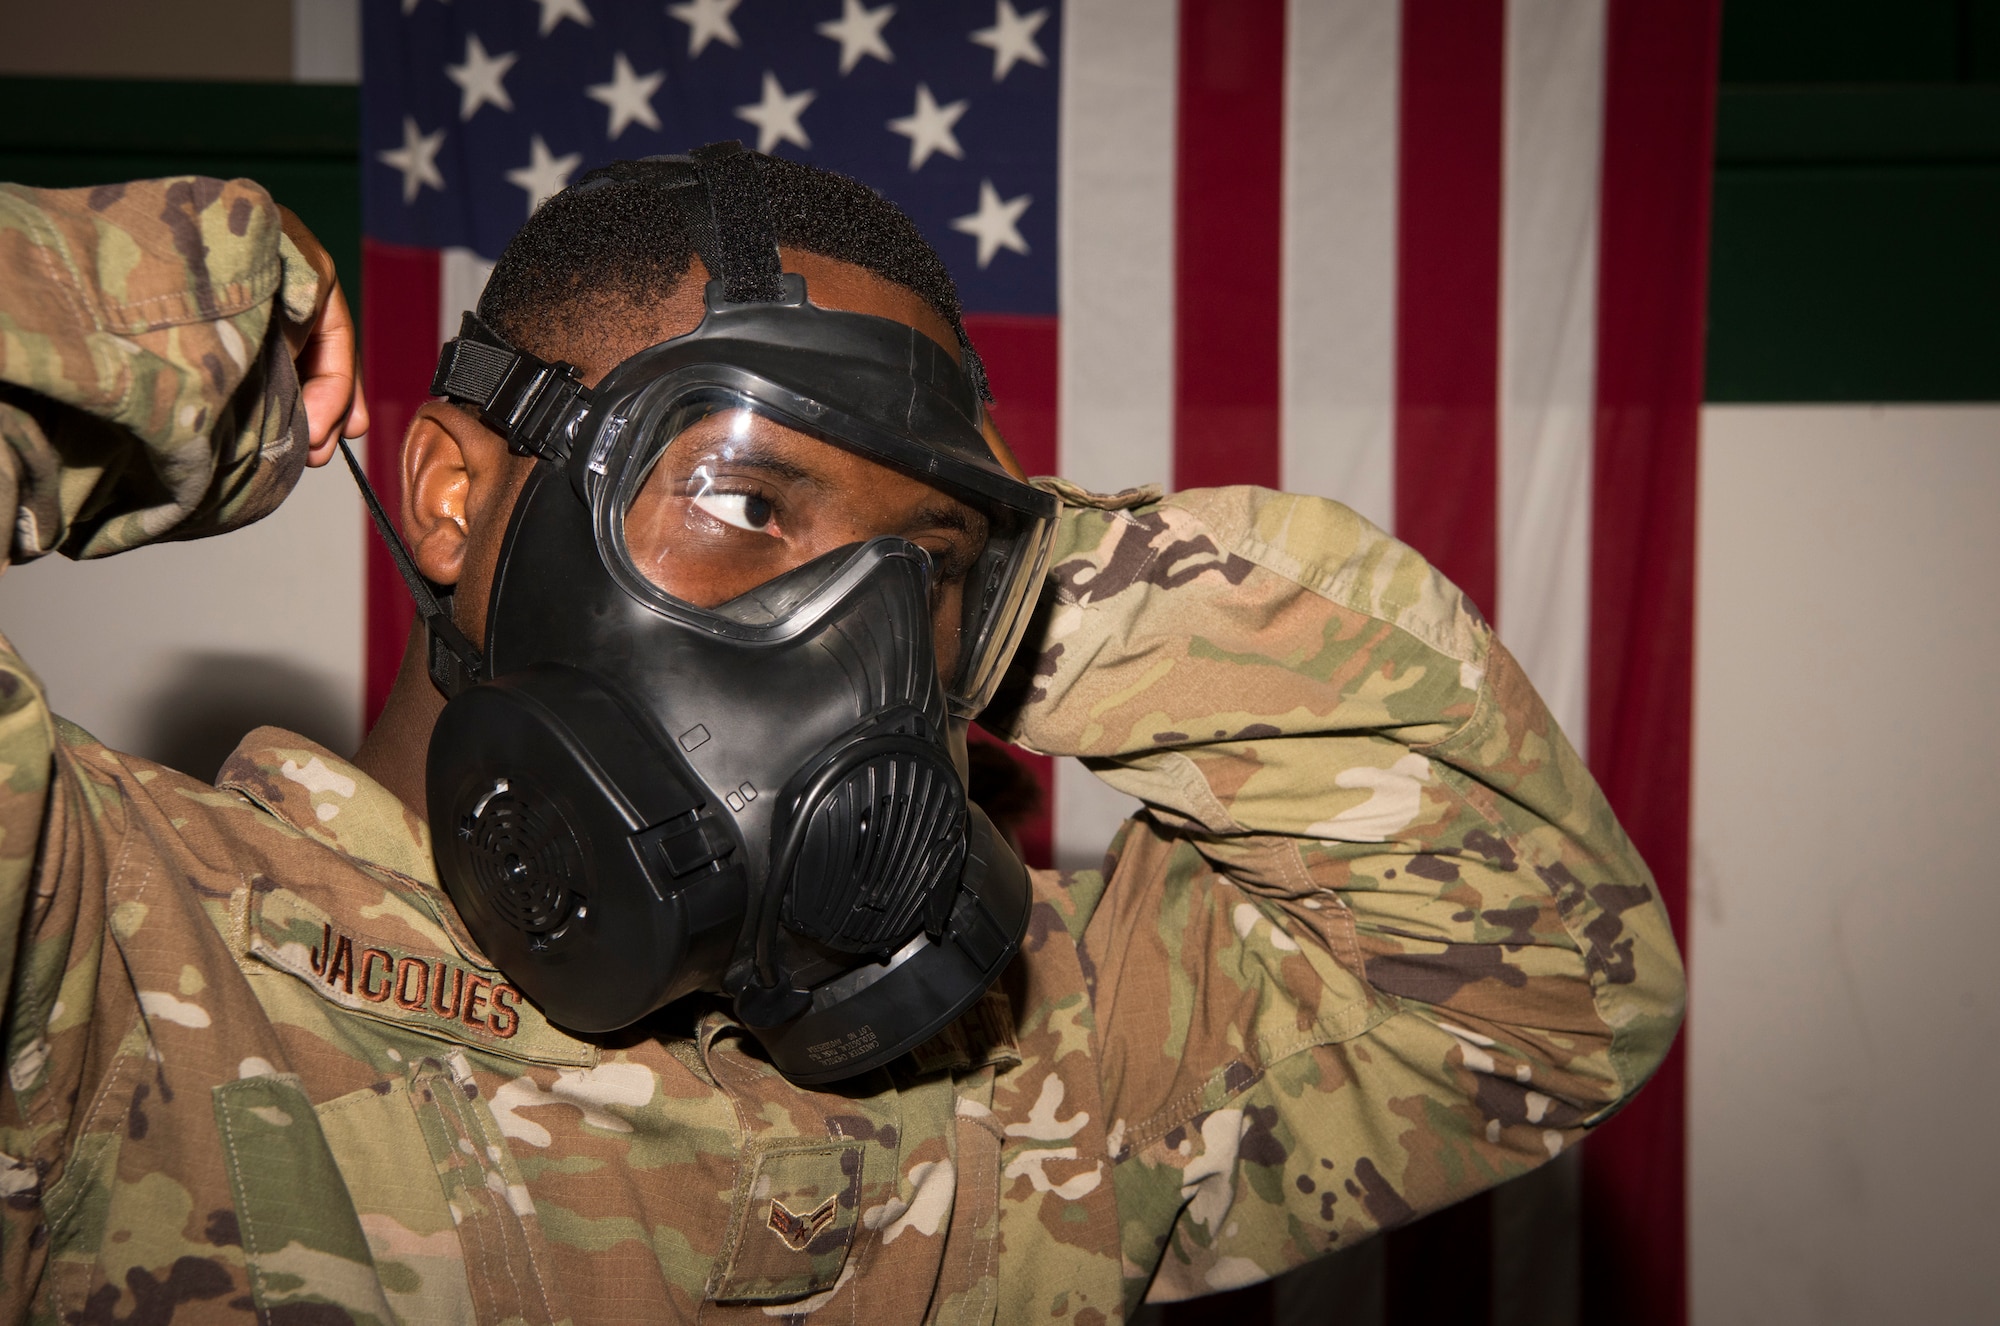 Airman 1st Class Kerson Jacques, a 6th Communications Squadron radio transmission systems technician, puts on a gas mask during deployment readiness training at MacDill Air Force Base, Fla., July 25, 2019.